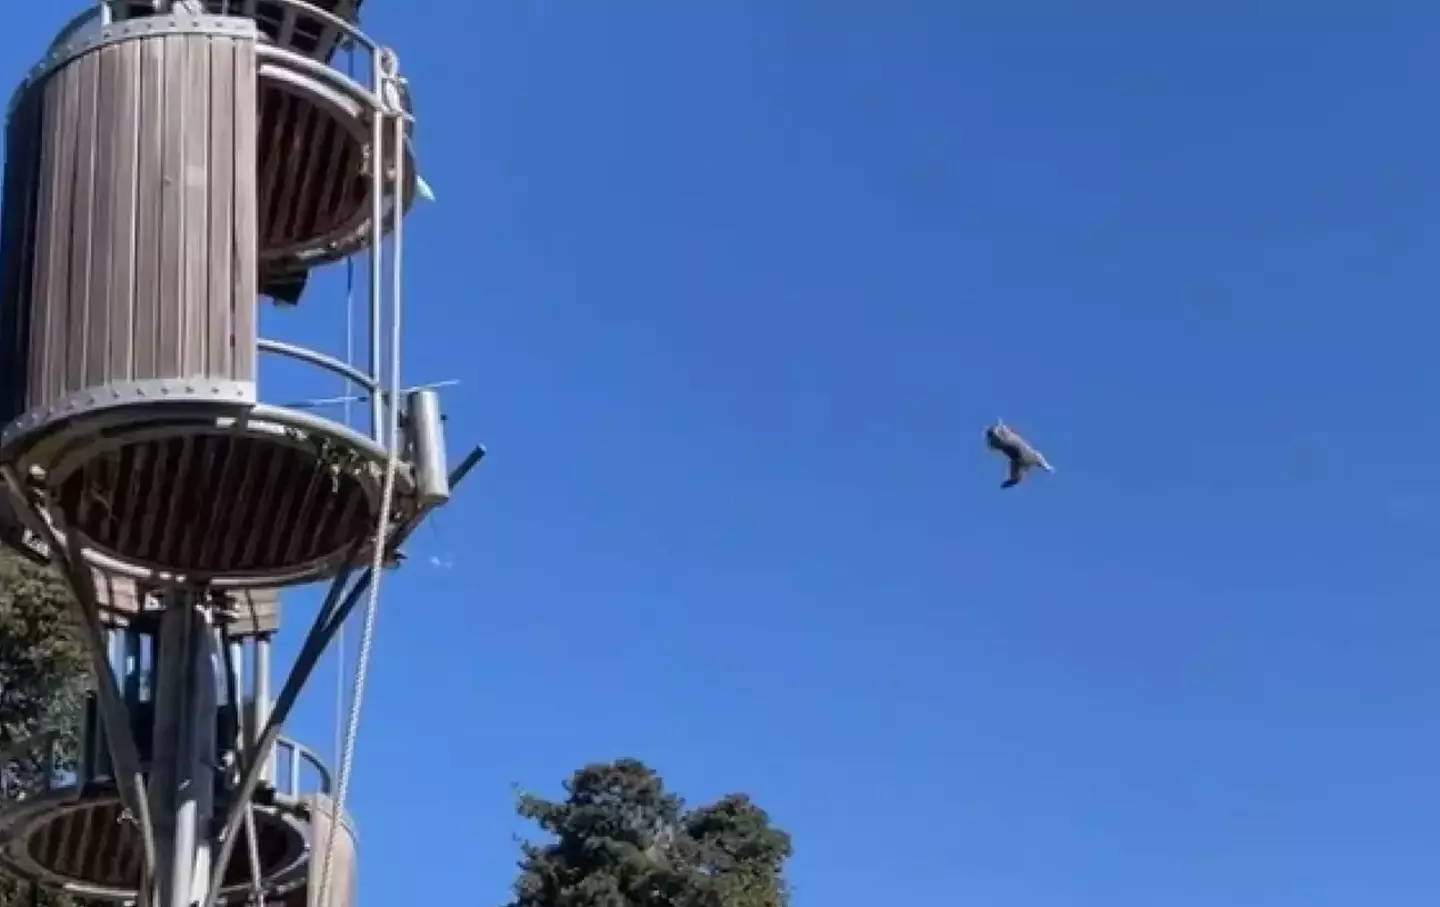 Possums can't fly, but according to Perth Zoo they can survive this.